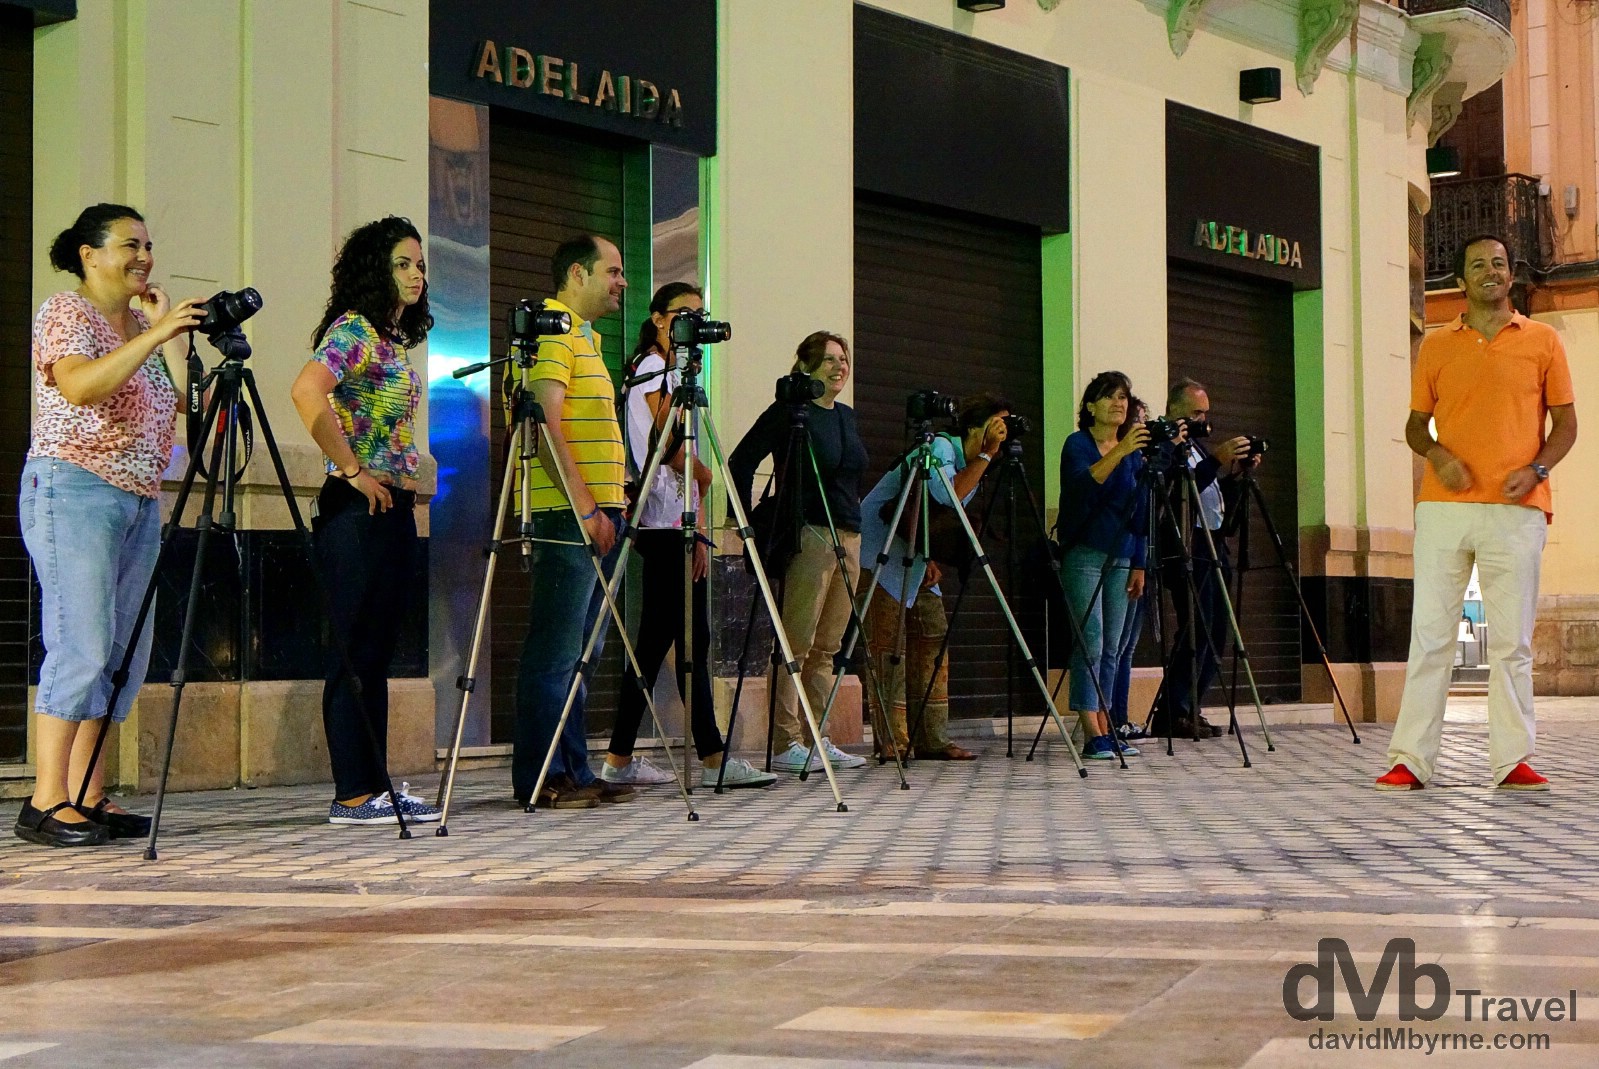 A photo workshop doing their thing on the streets of Malaga, Andalusia, Spain. June 9th, 2014.